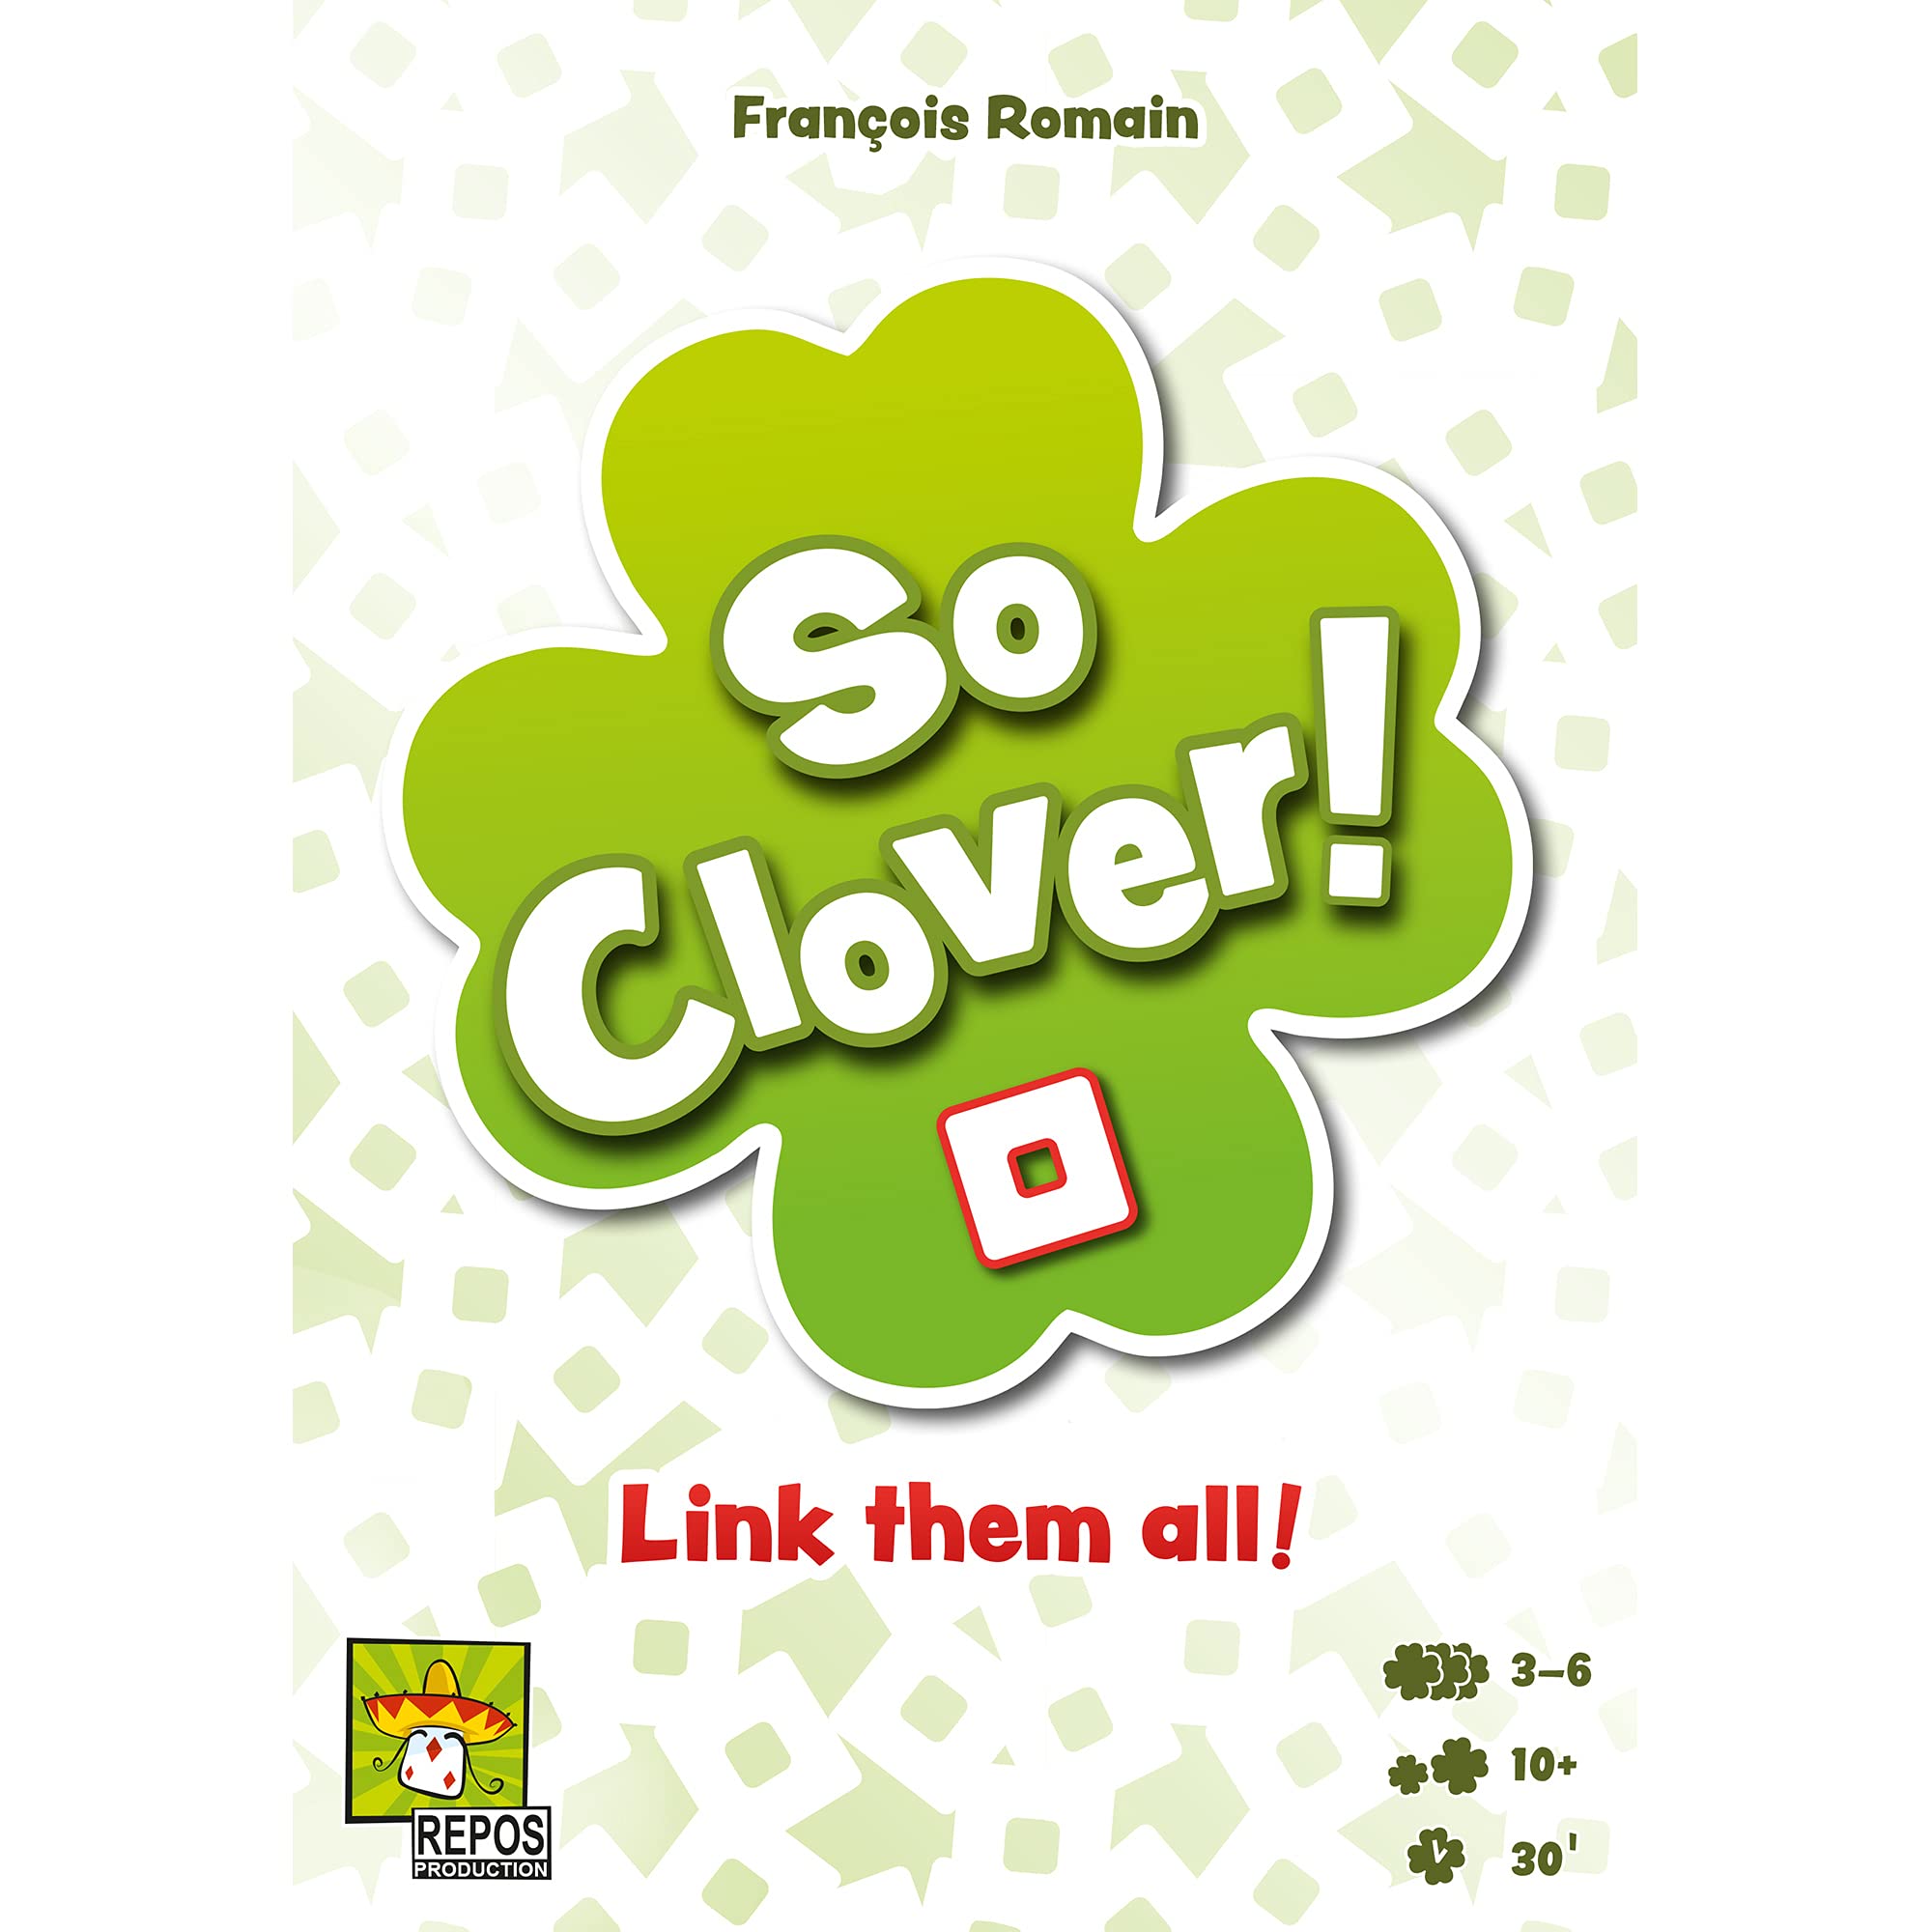 So Clover! Board Game | Party| Cooperative Word Association| Family Game for Adults and Kids | Ages 10 and up | 3-6 Players | Average Playtime 30 Minutes | Made by Repos Production